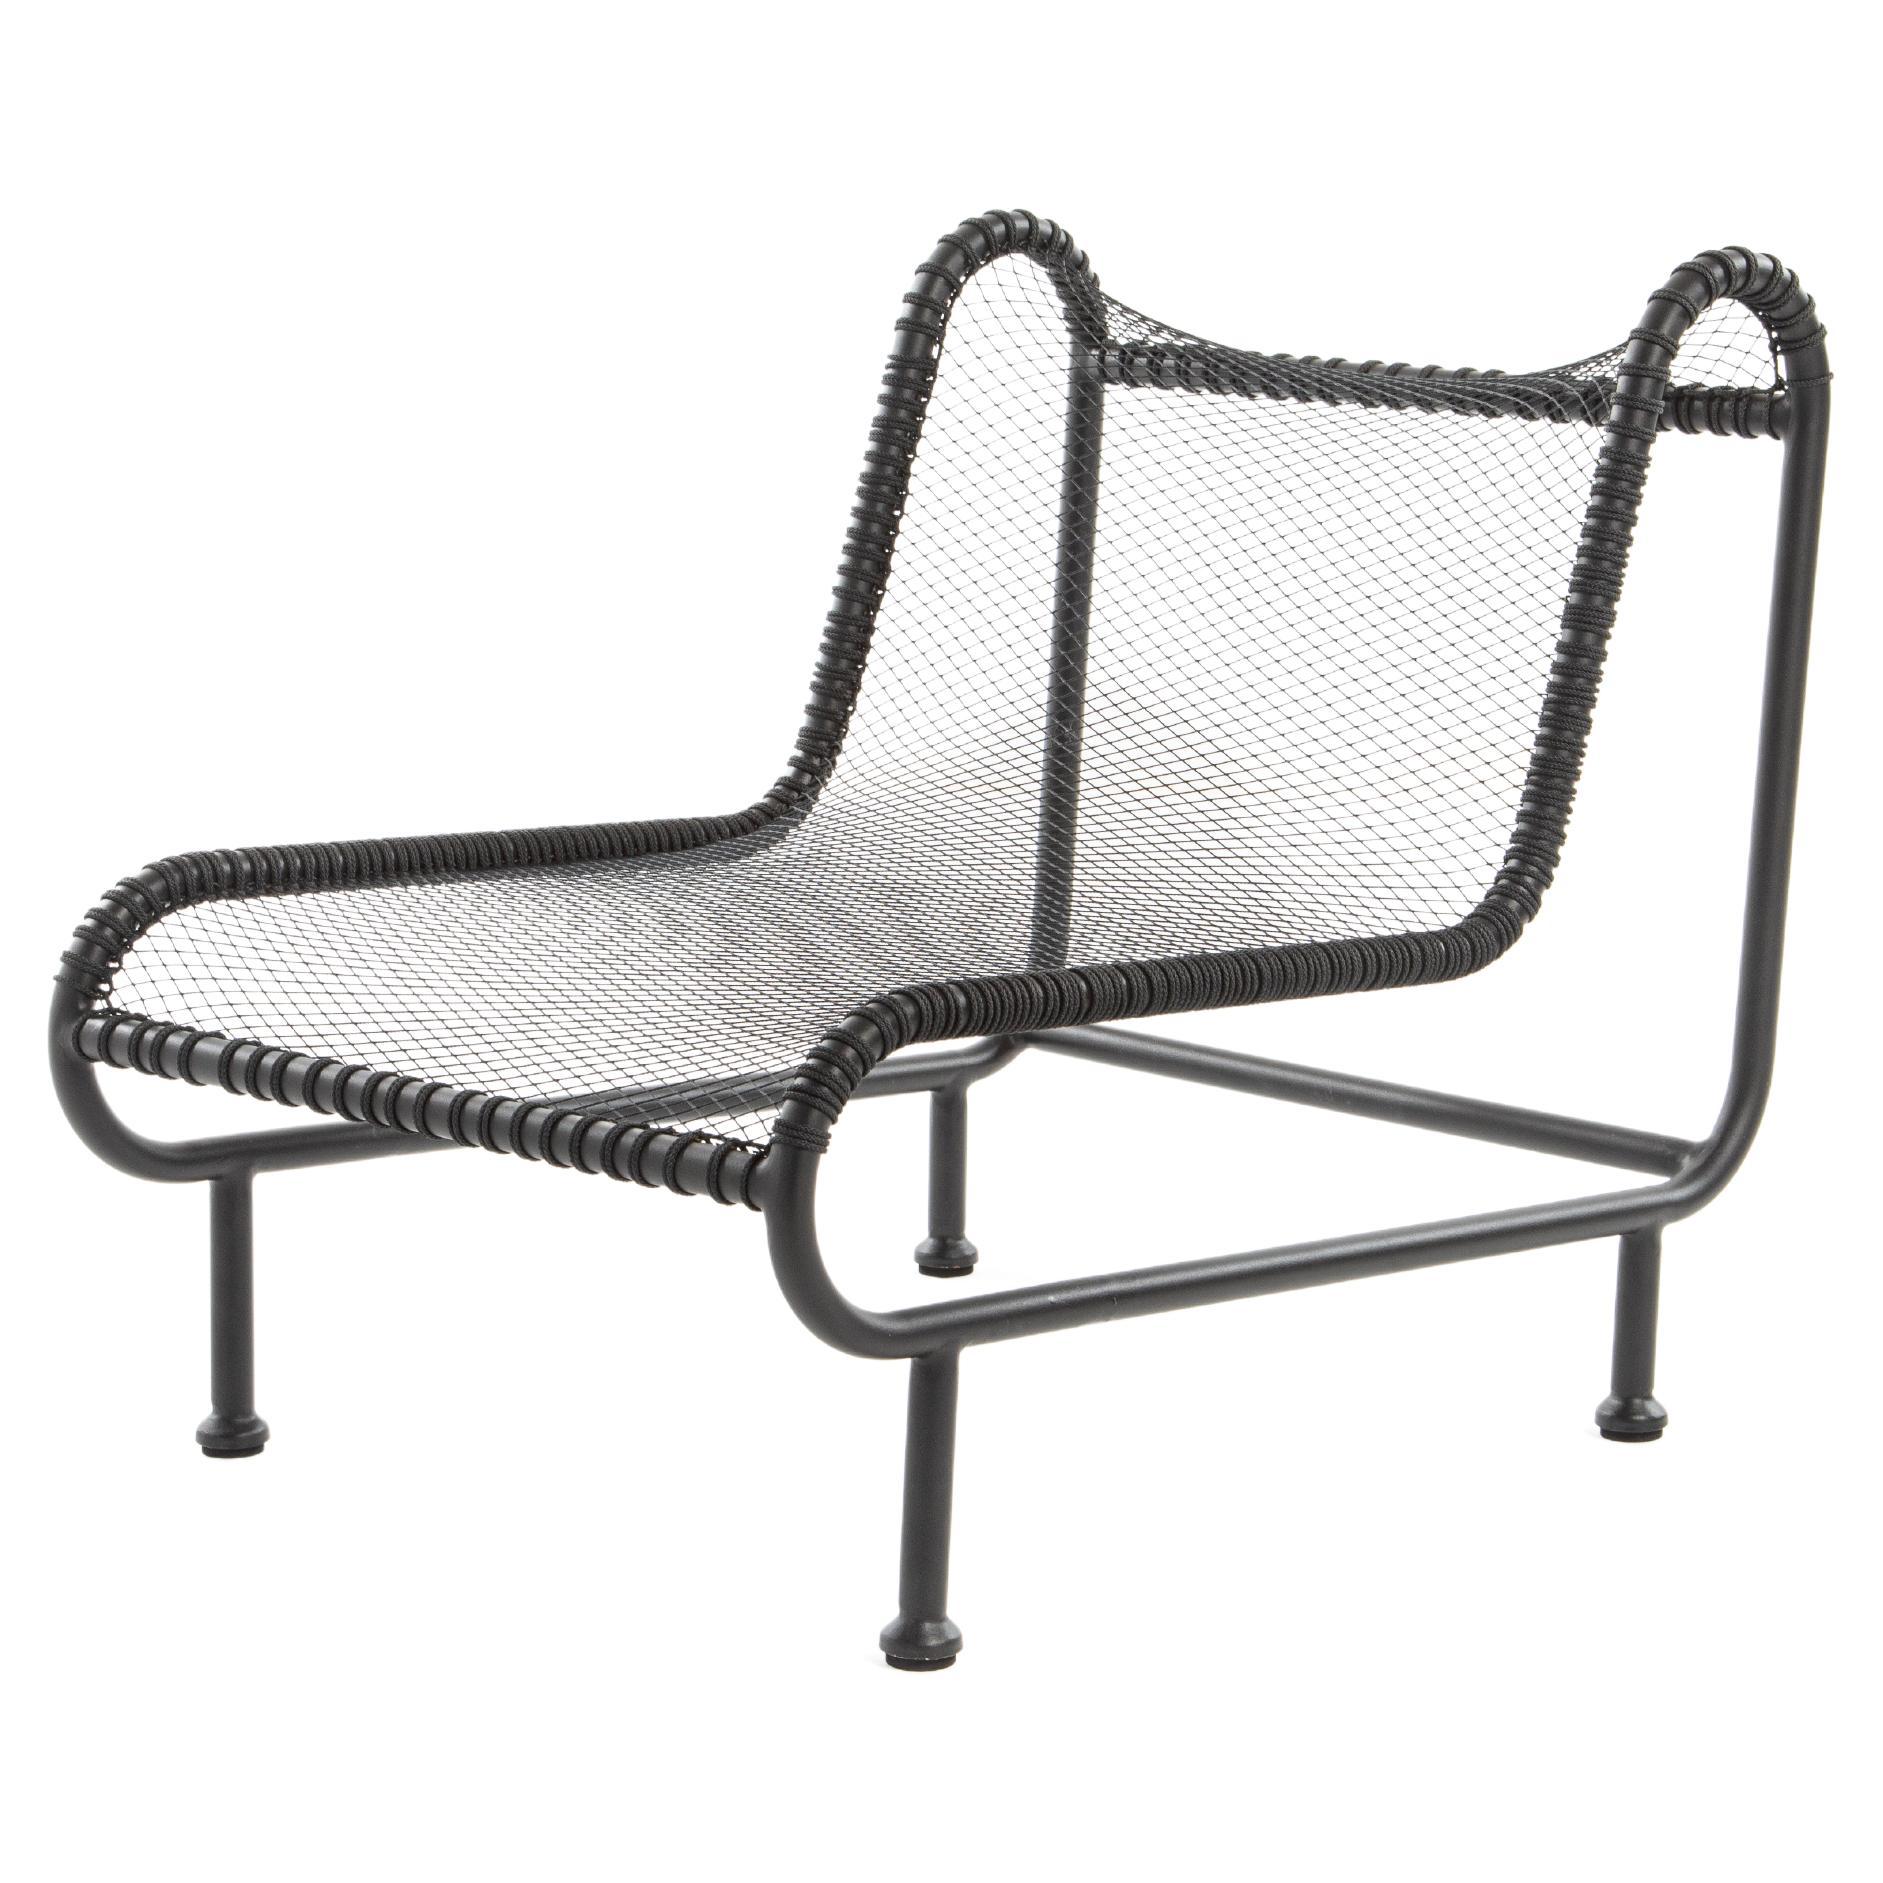 Grand Ribaud lounge chair, powder coated steal and fishing net by 13 Desserts